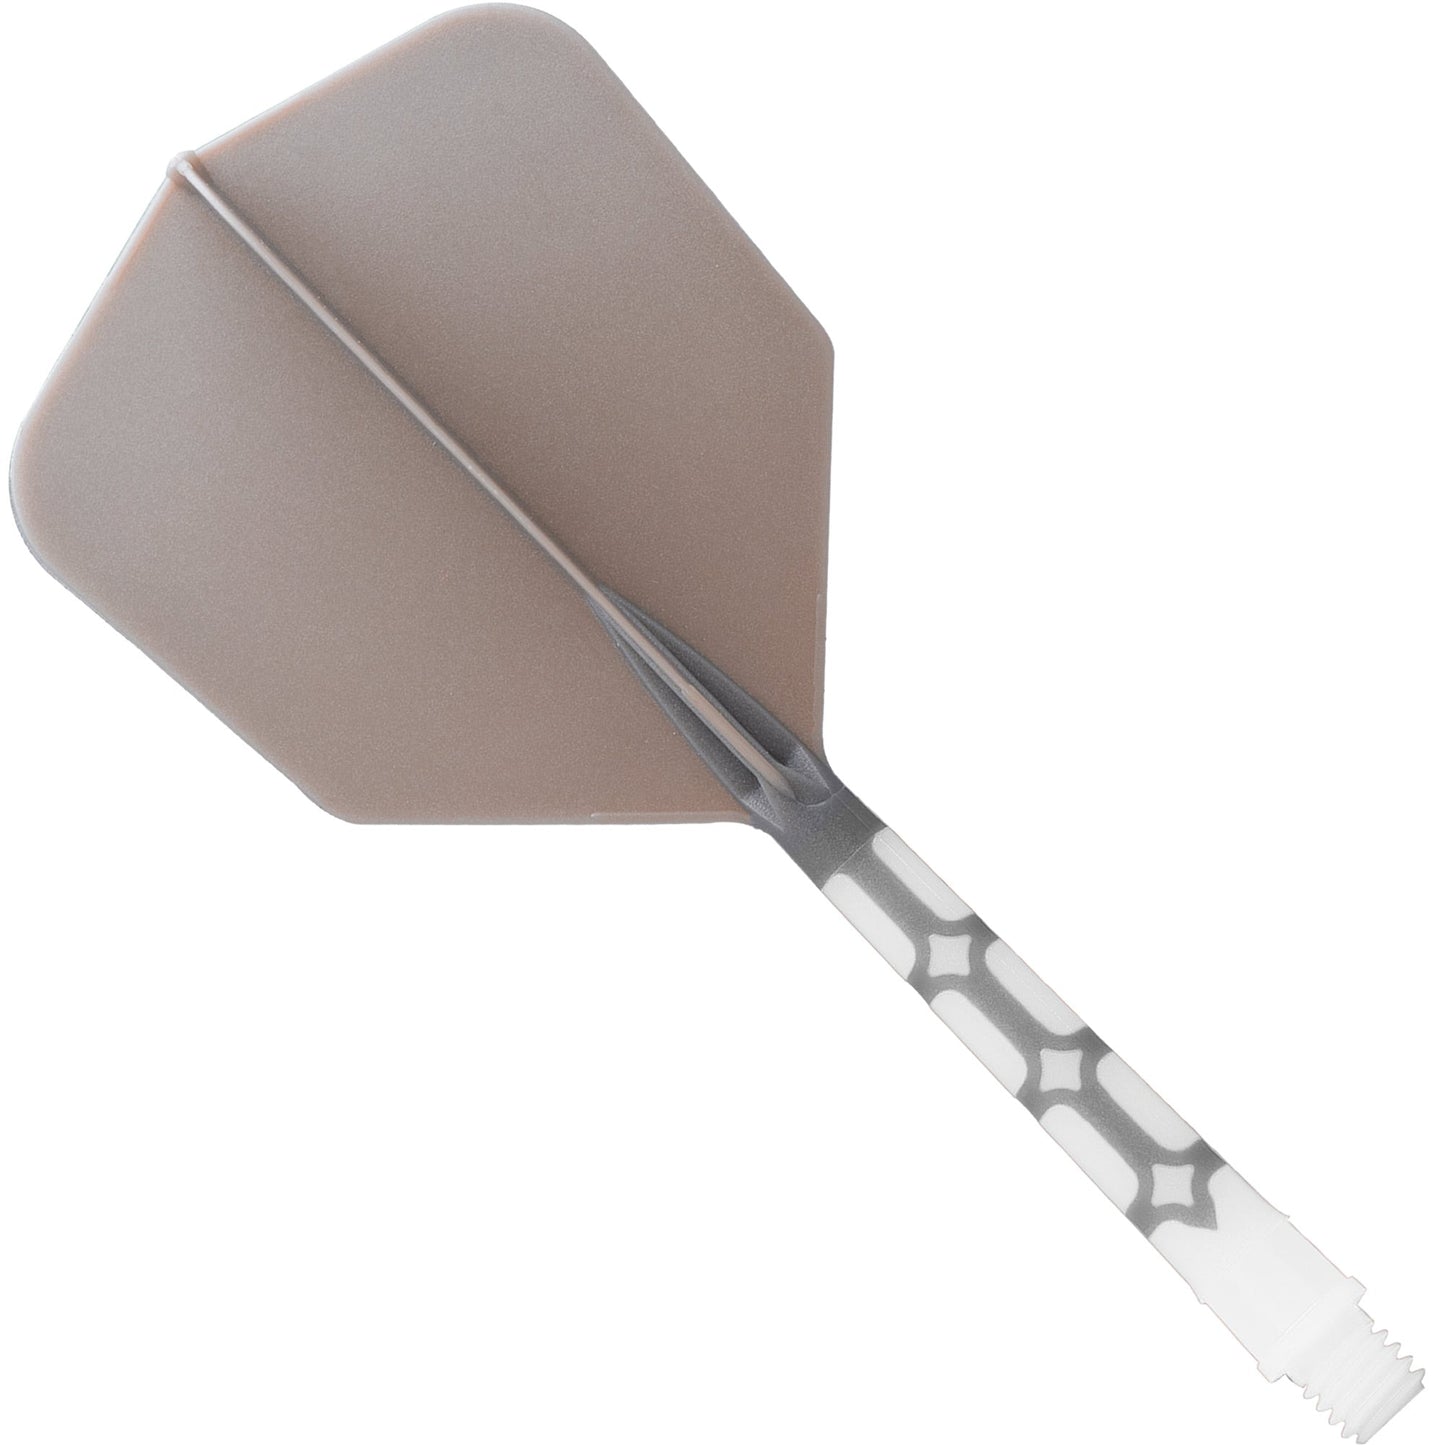 Cuesoul Rost T19 Integrated Dart Shaft and Flights - Big Wing - White with Grey Flight Long